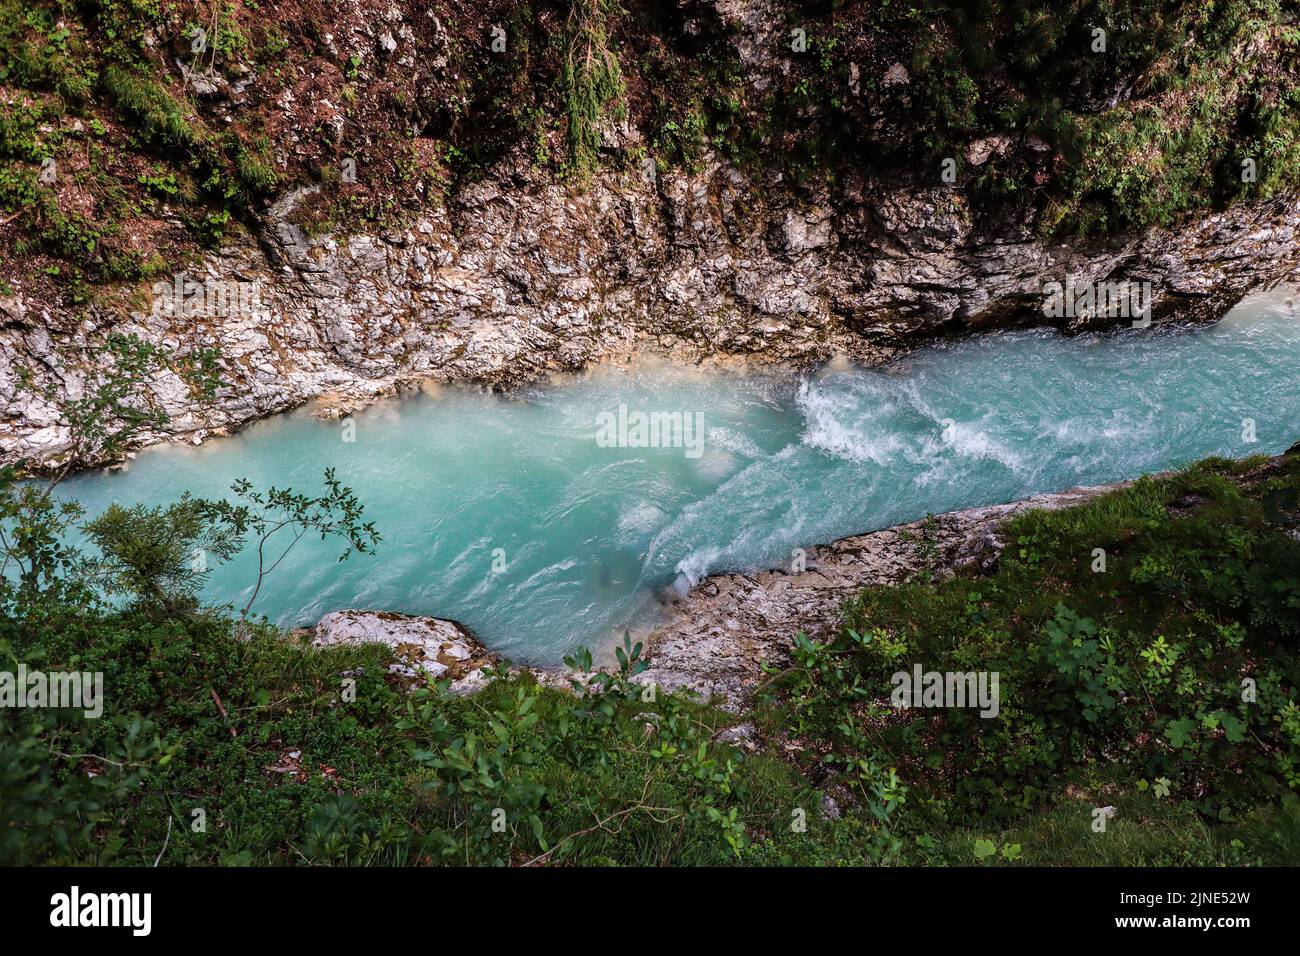 Top View of Leutascher Ache River in Leutasch Gorge. Above View of Mountain Turquoise Stream in Tyrolean Nature. Stock Photo